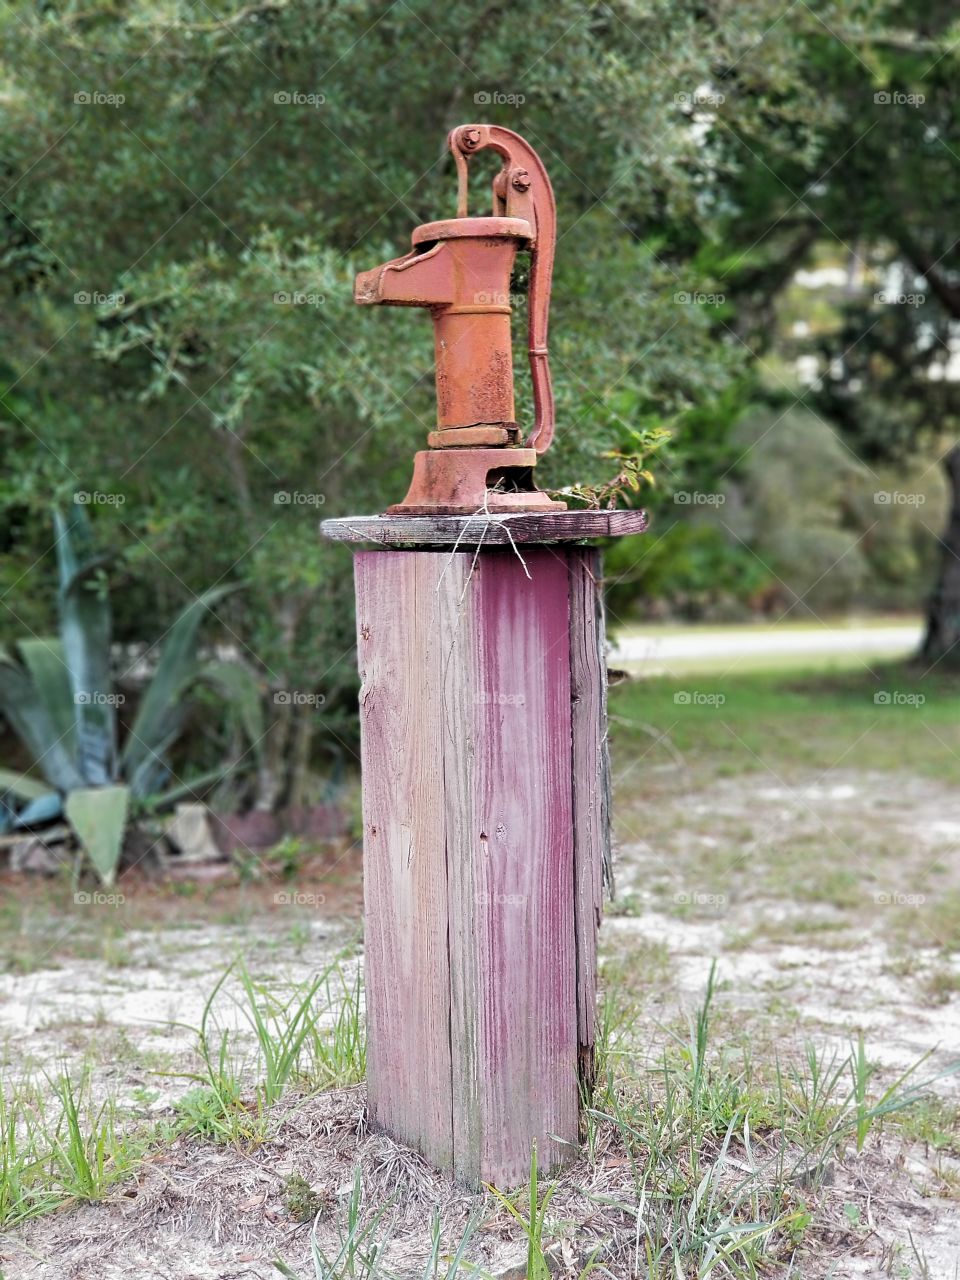 From Past To Present and Looking Into The Future.... some Items are simply Timeless and suggests the struggle and success of Life, such as this Hand Dug Well and  Manual water pump.